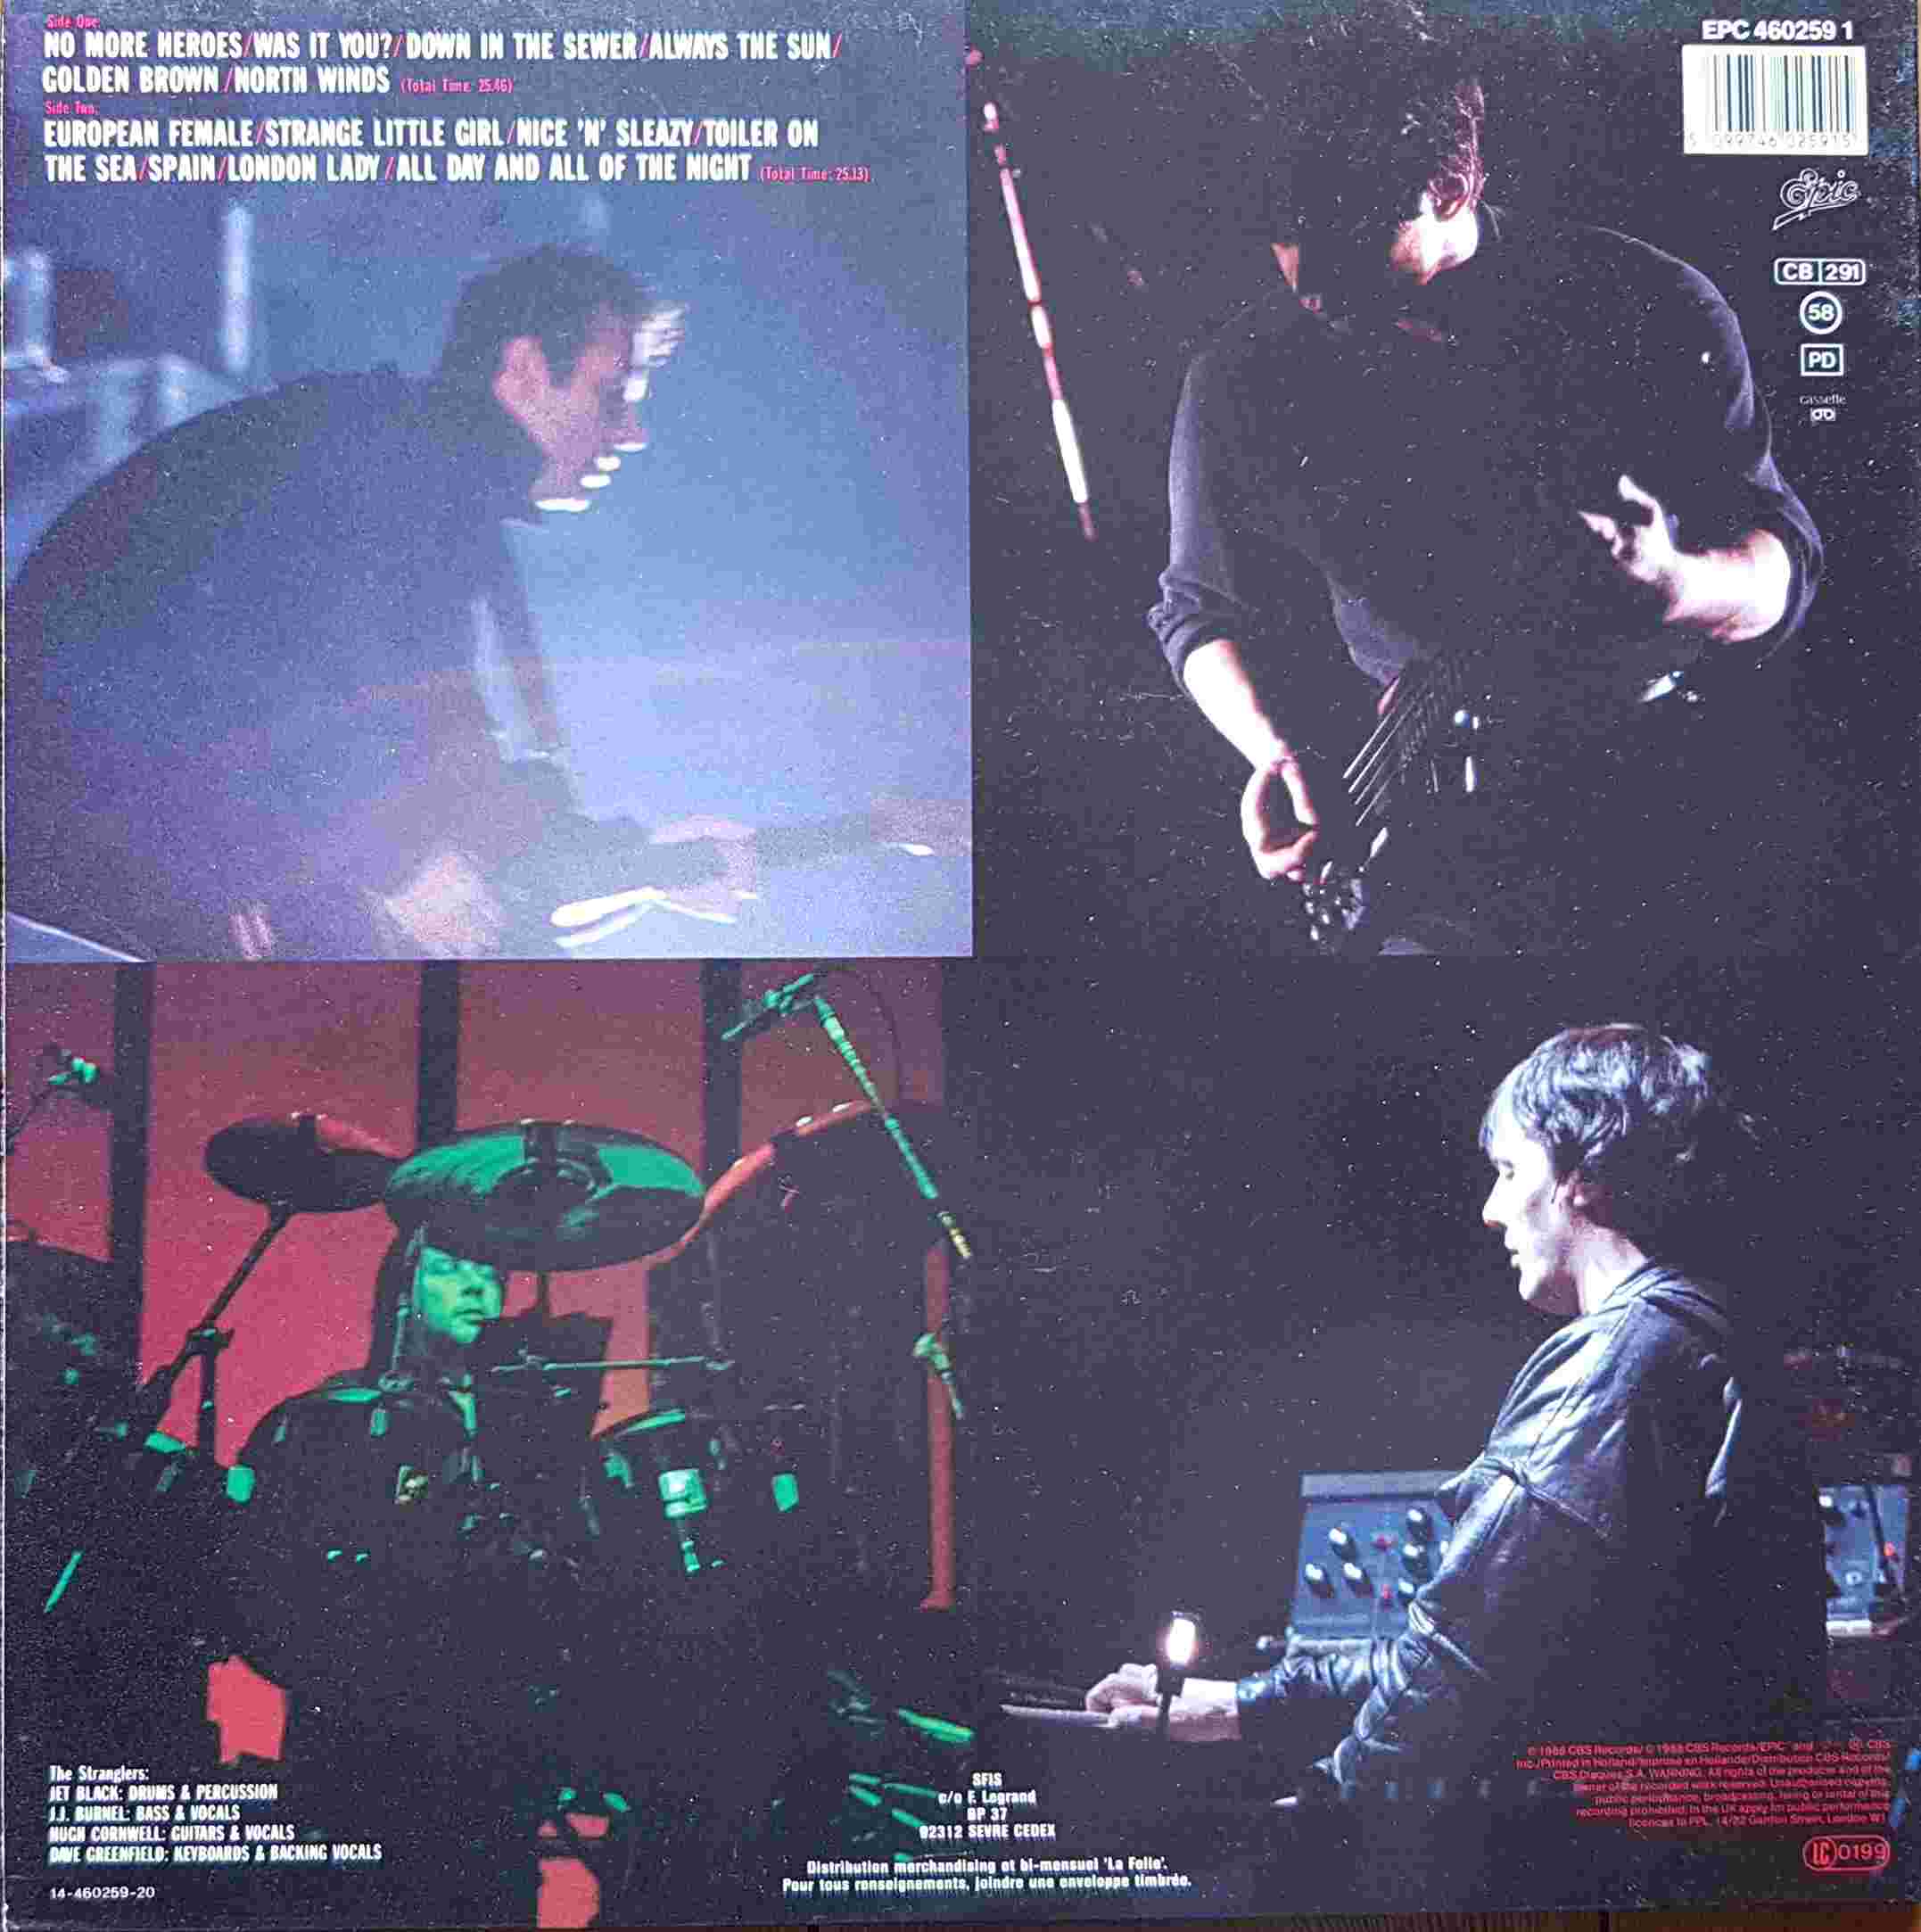 Picture of 460259 1 All live and all of the night by artist The Stranglers  from The Stranglers